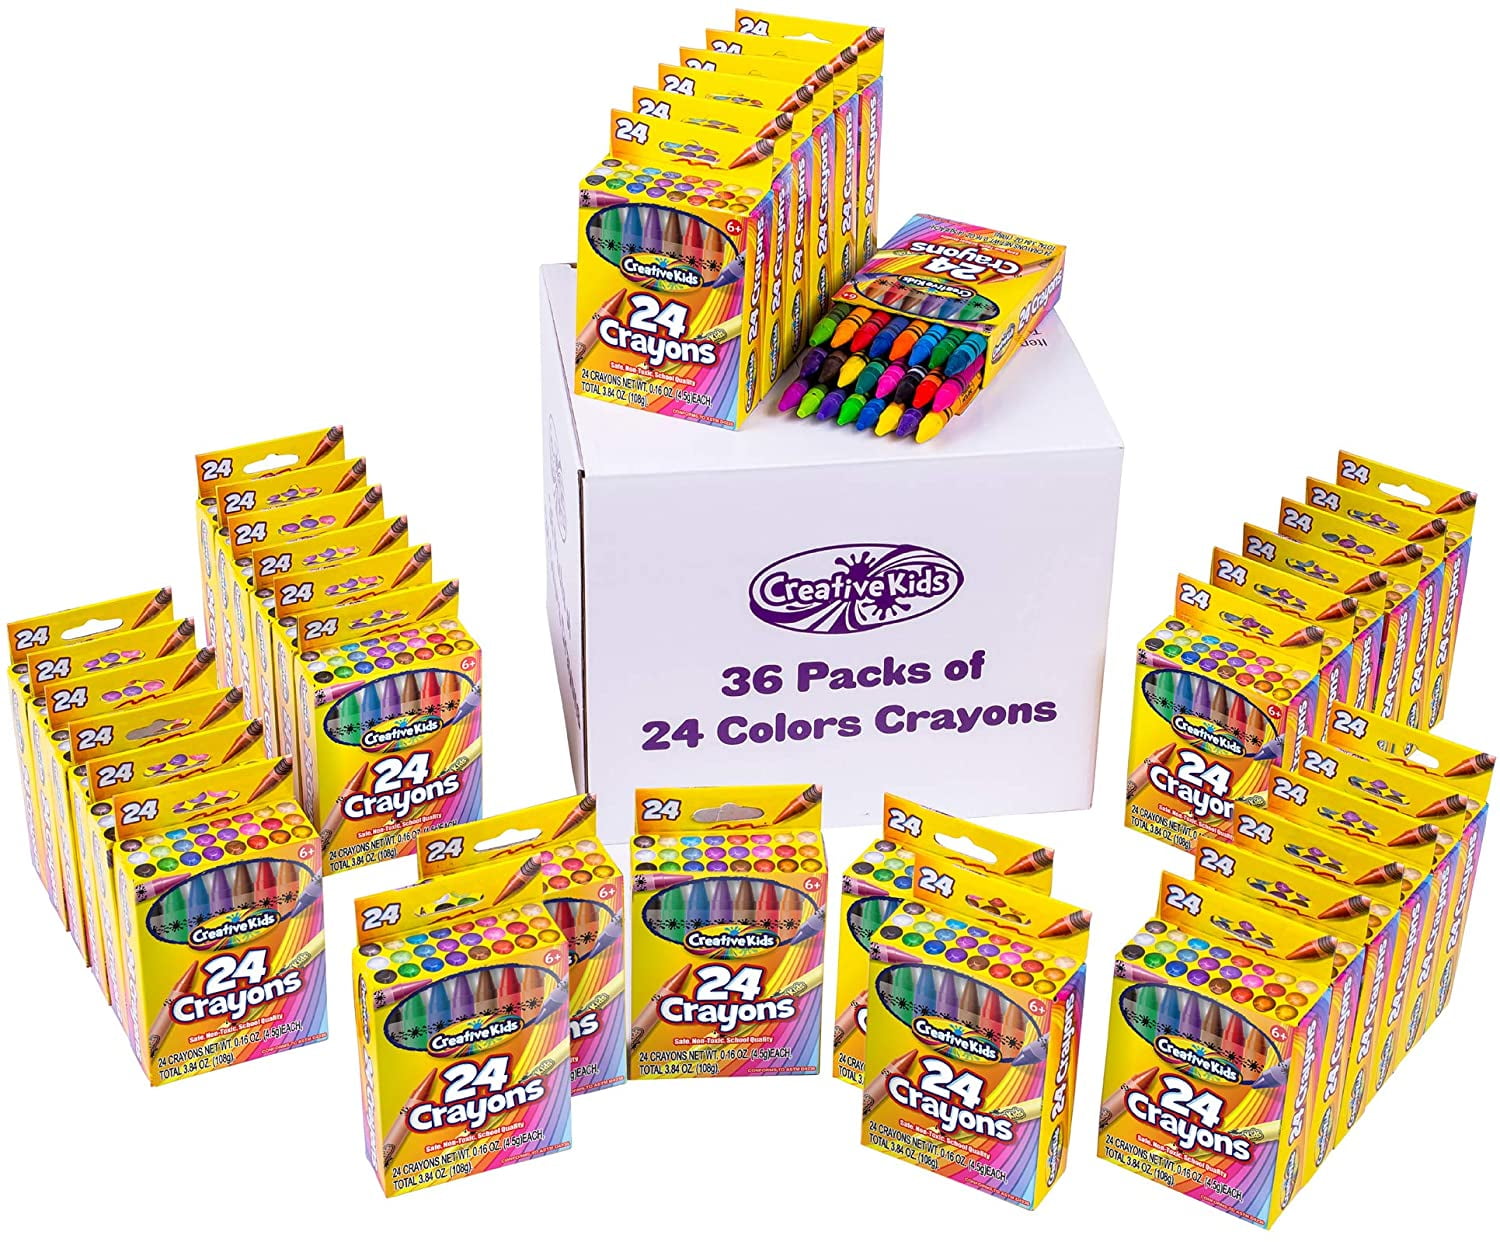 Baker Ross AF989 Mini Crayons - Pack of 8 Boxes, Arts and Crafts Supplies and School Classroom Supplies, Assorted, 7cmx5cm